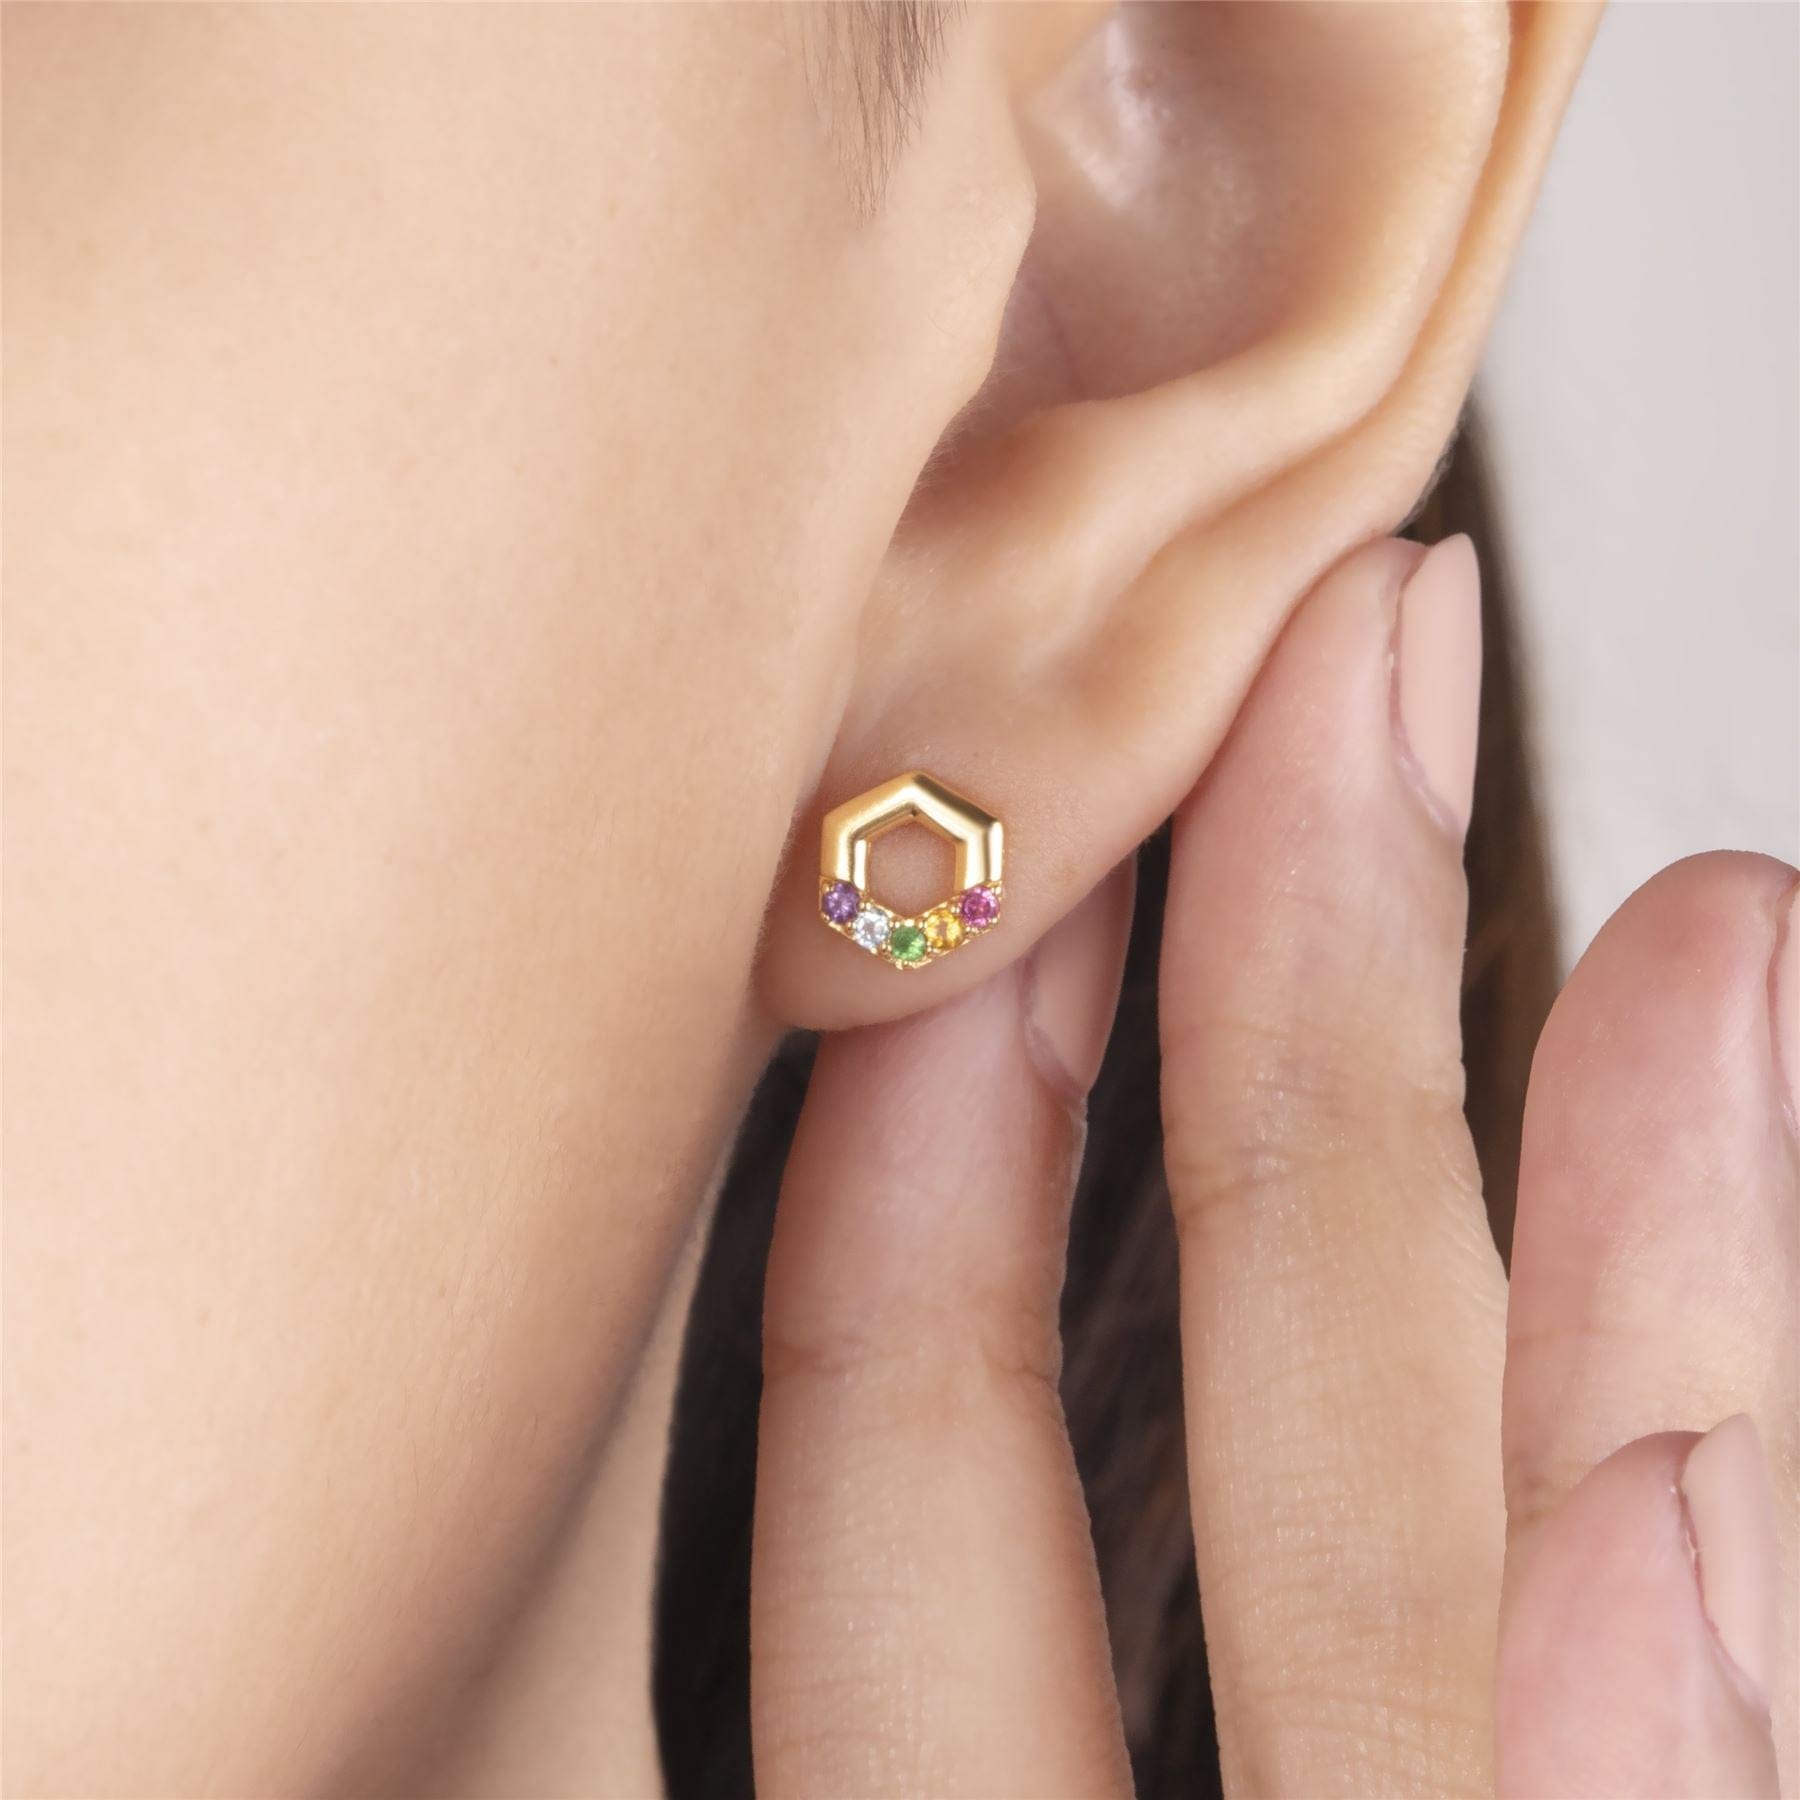 270E031601925 Rainbow Hexagon Stud Earrings in Gold Plated Sterling Silver 2